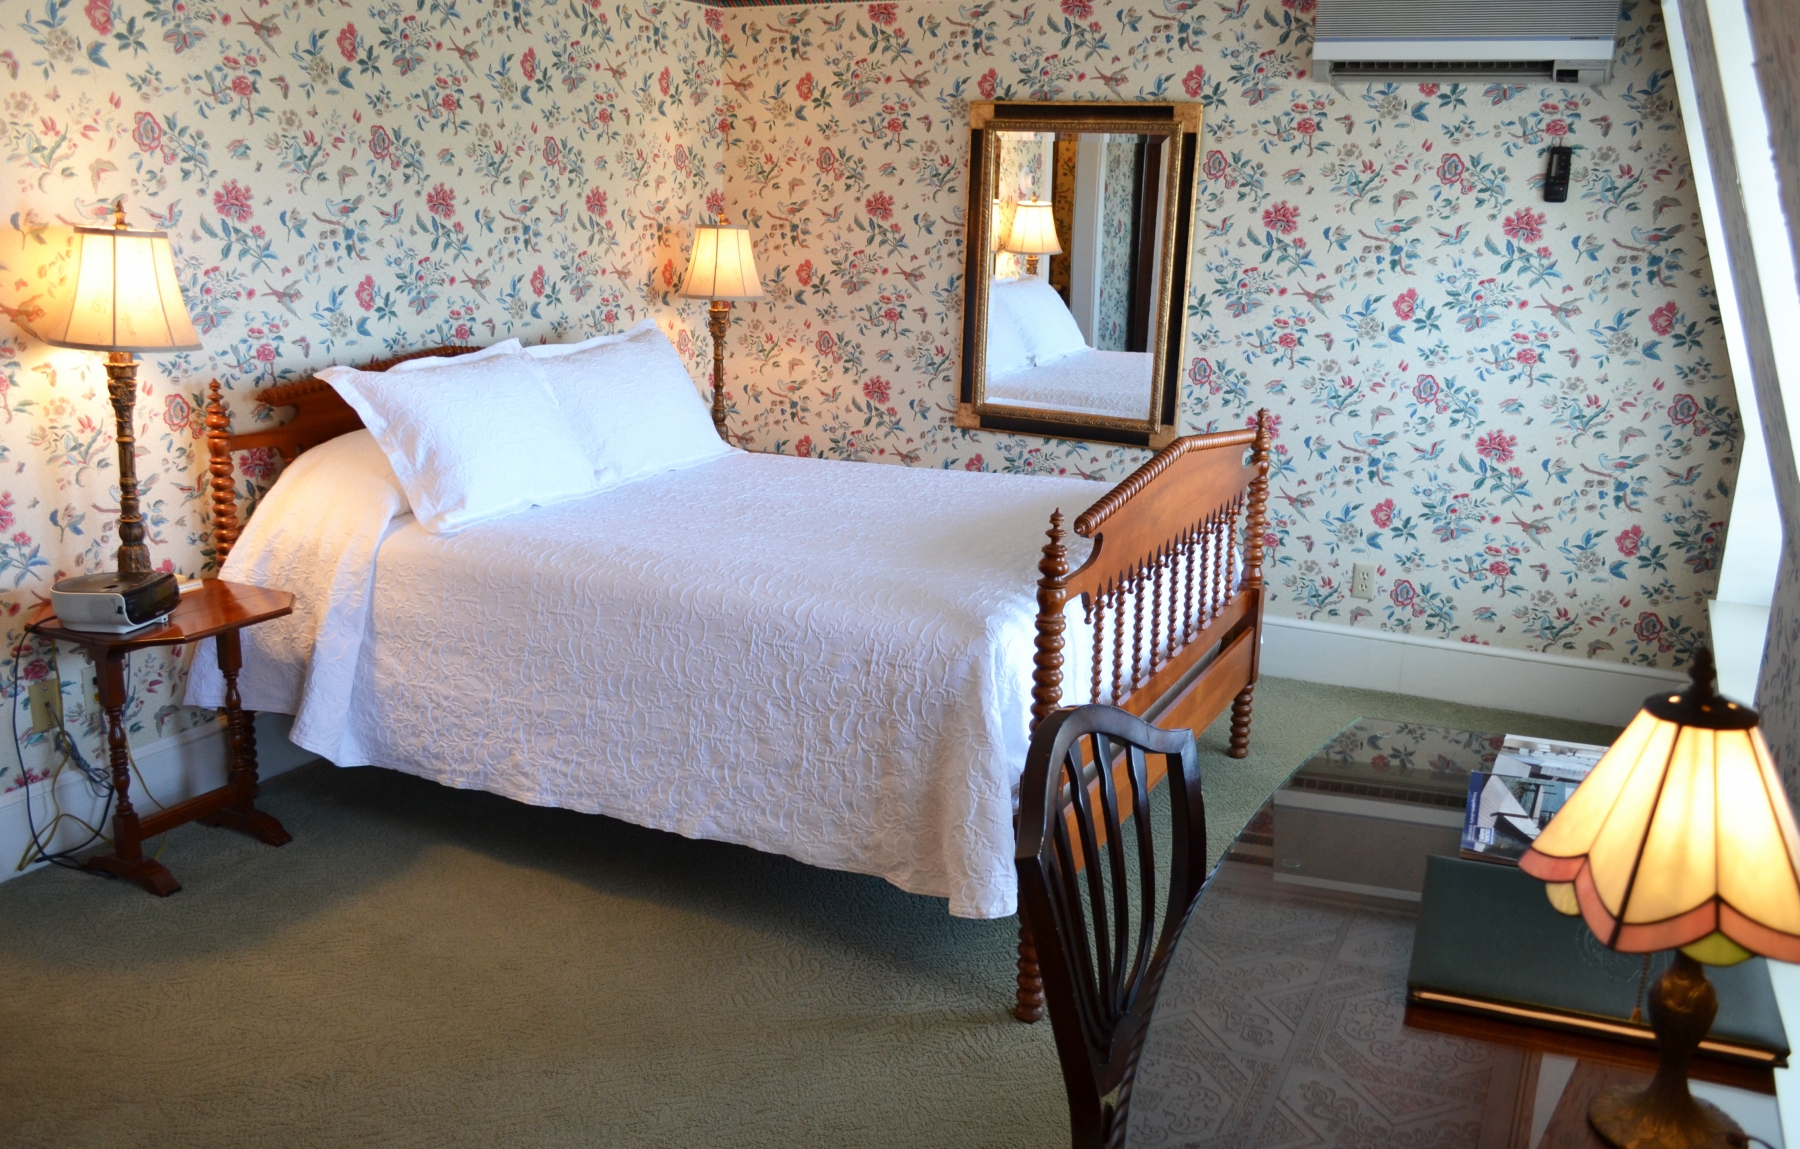 Hotel room with floral wallpaper and 1 bed with white sheets 